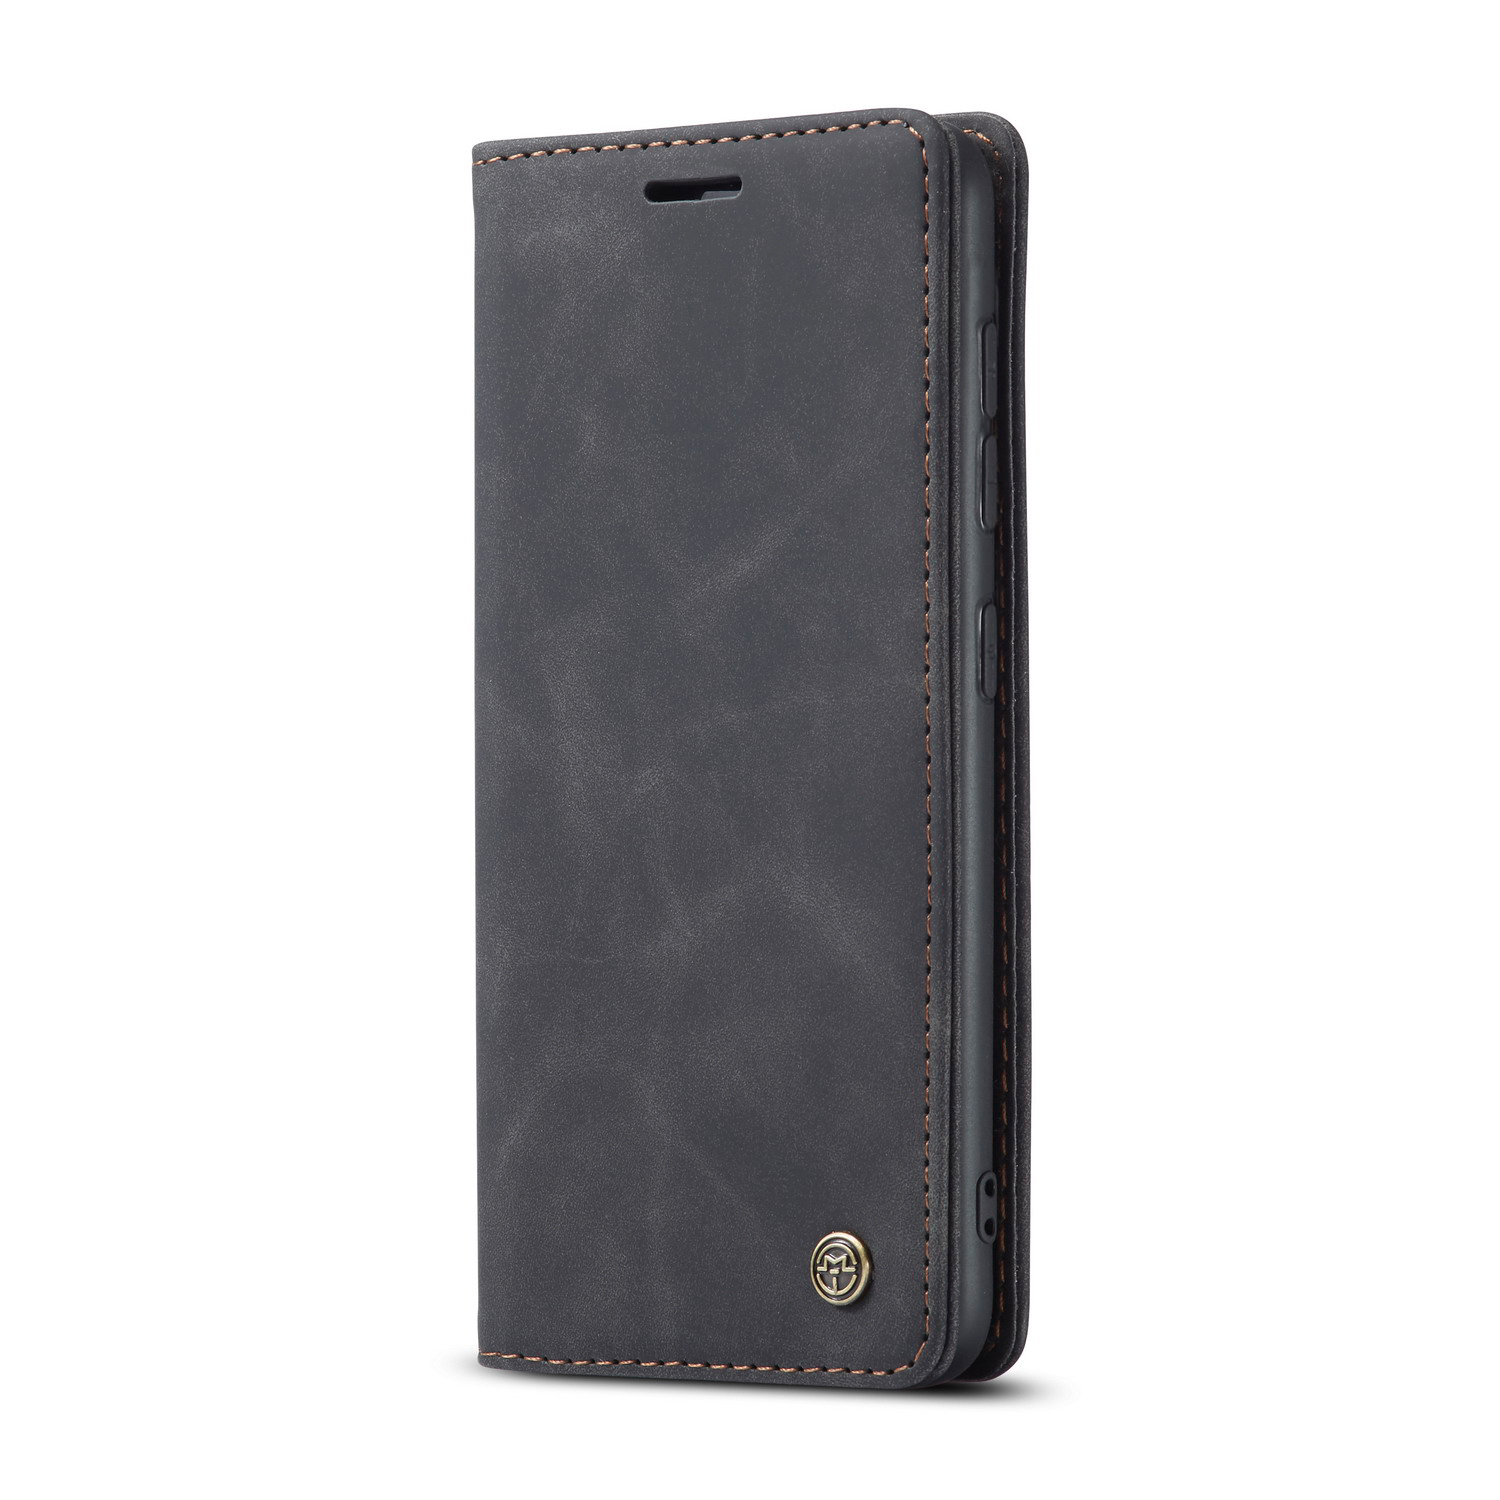 CASEME 013 Series Auto-absorbed Leather Wallet Case for S20+-Black